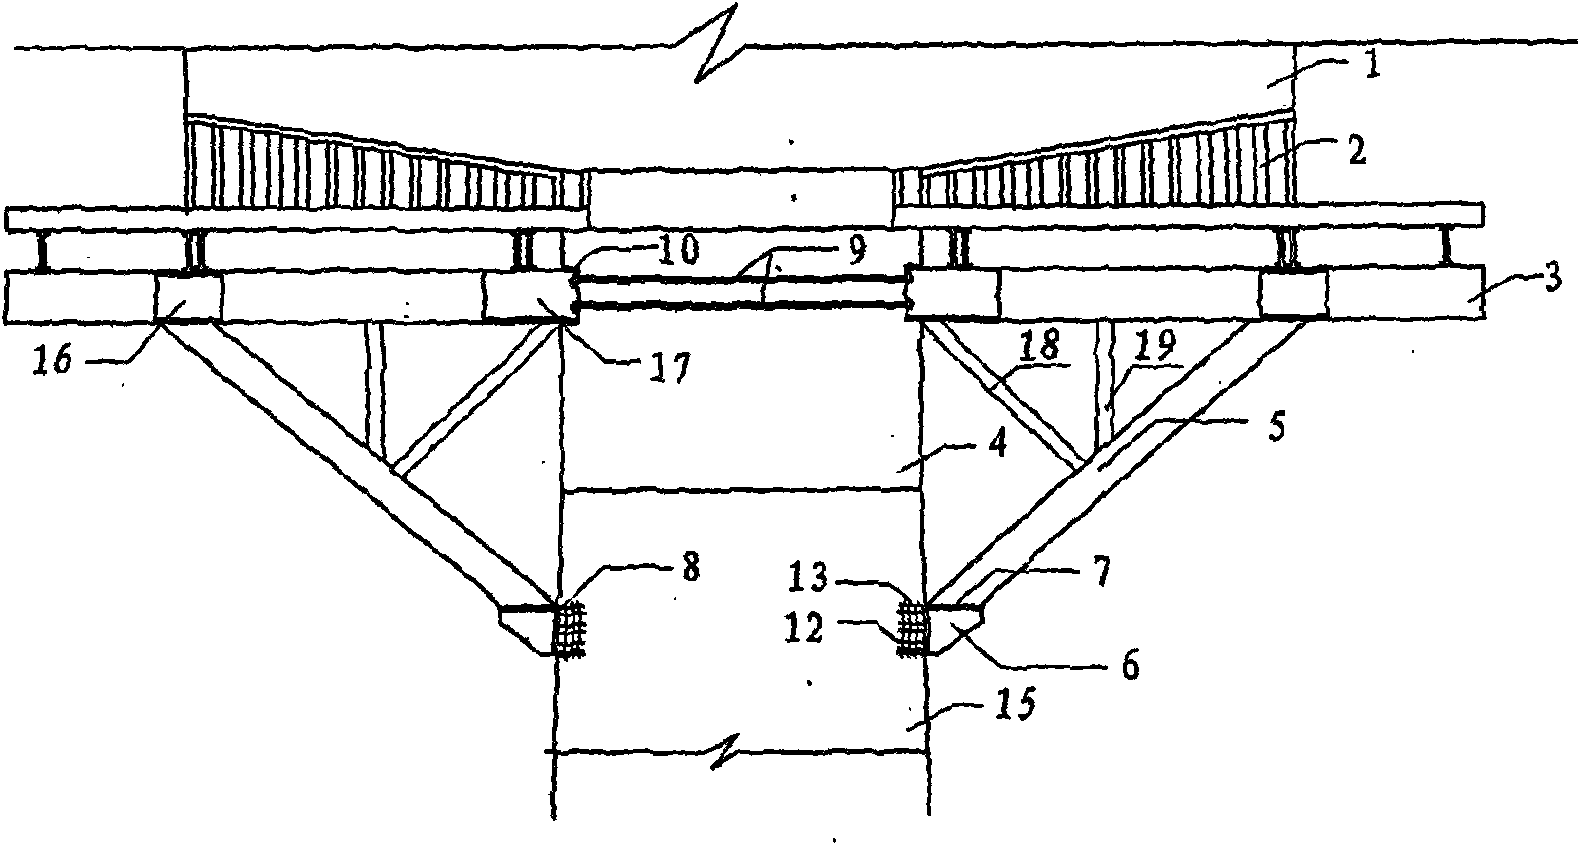 Method for casting concrete 0# block support by continuous beam cantilever